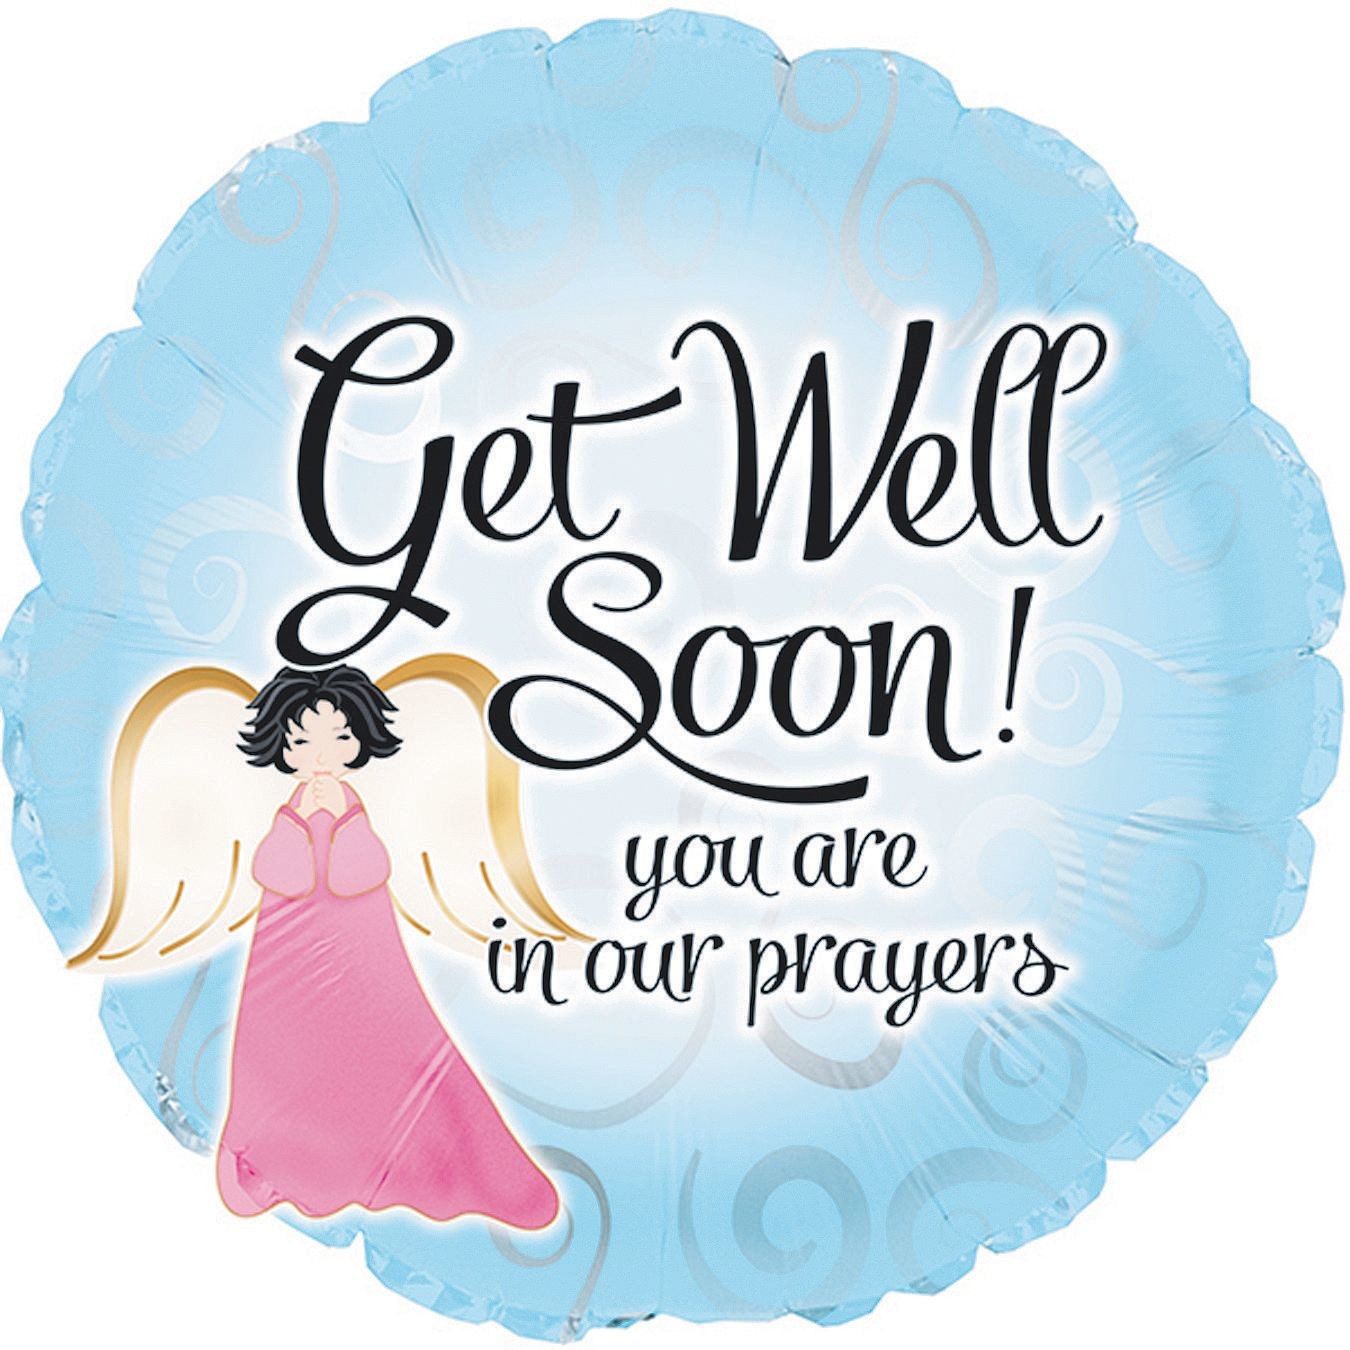 Buy Get Well Soon Balloons, “You are in our prayers”, 17” Round ...